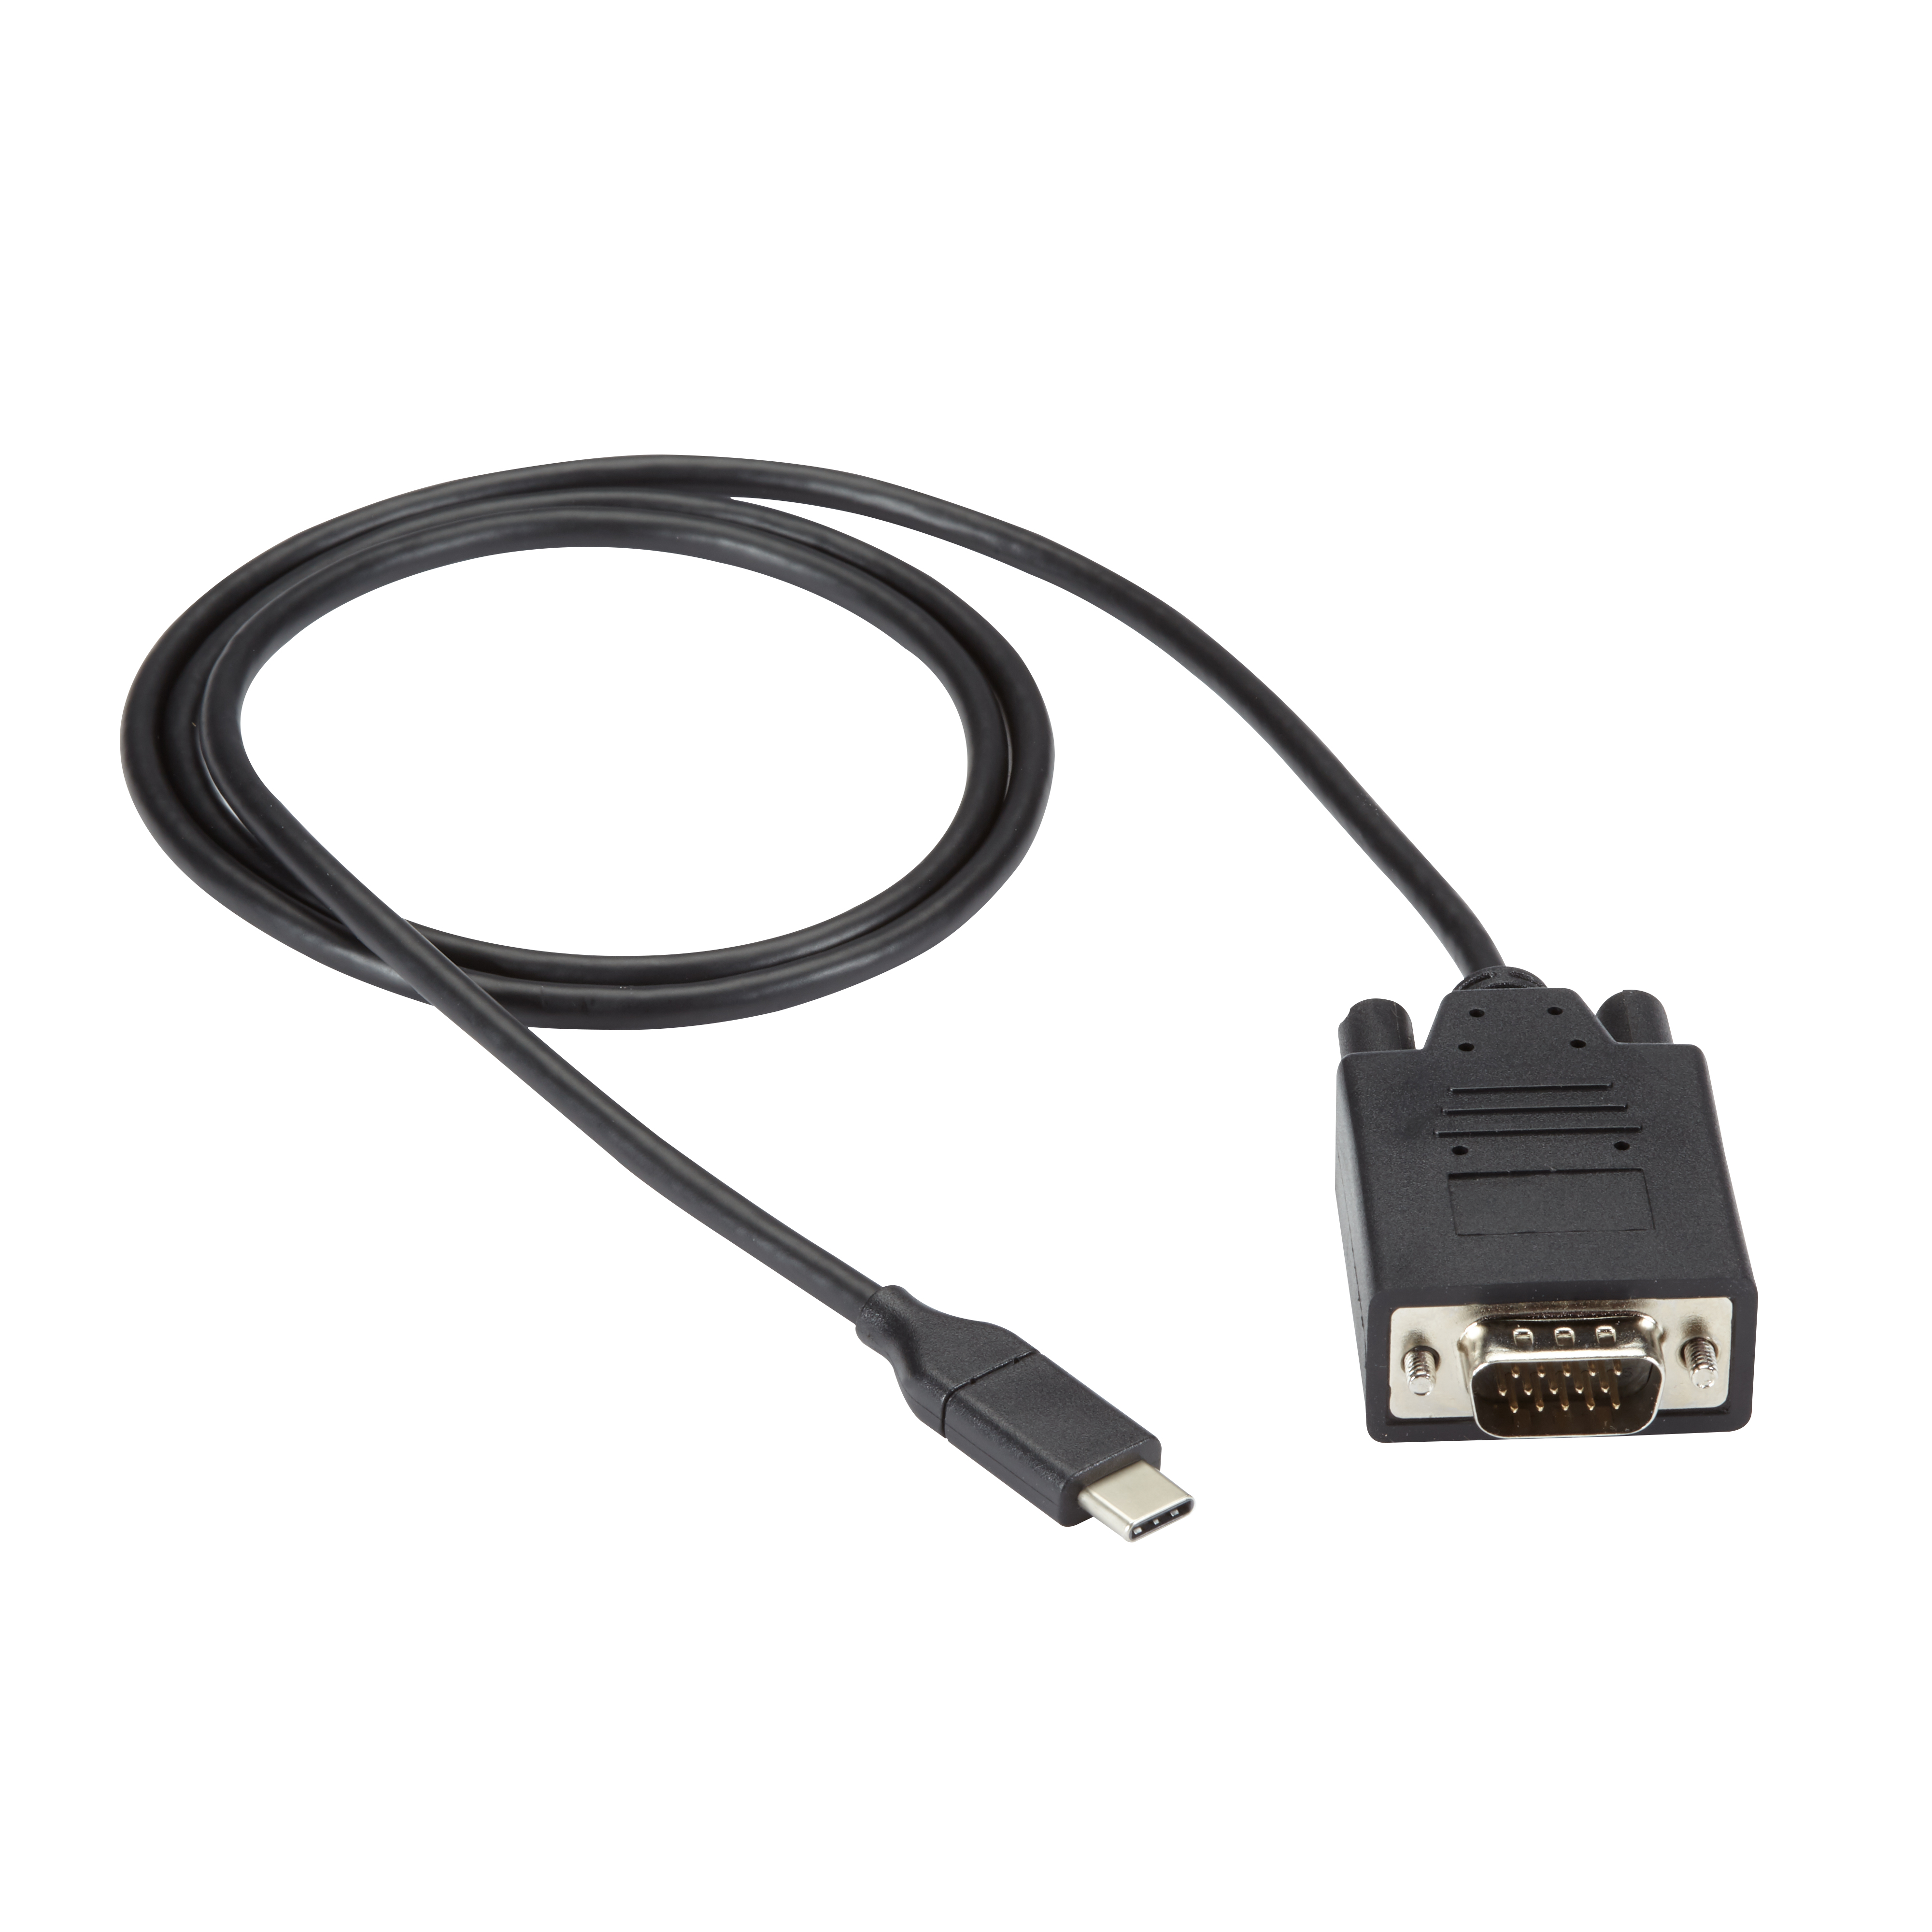 USB-C to VGA Adapter Cable, 1080p HD